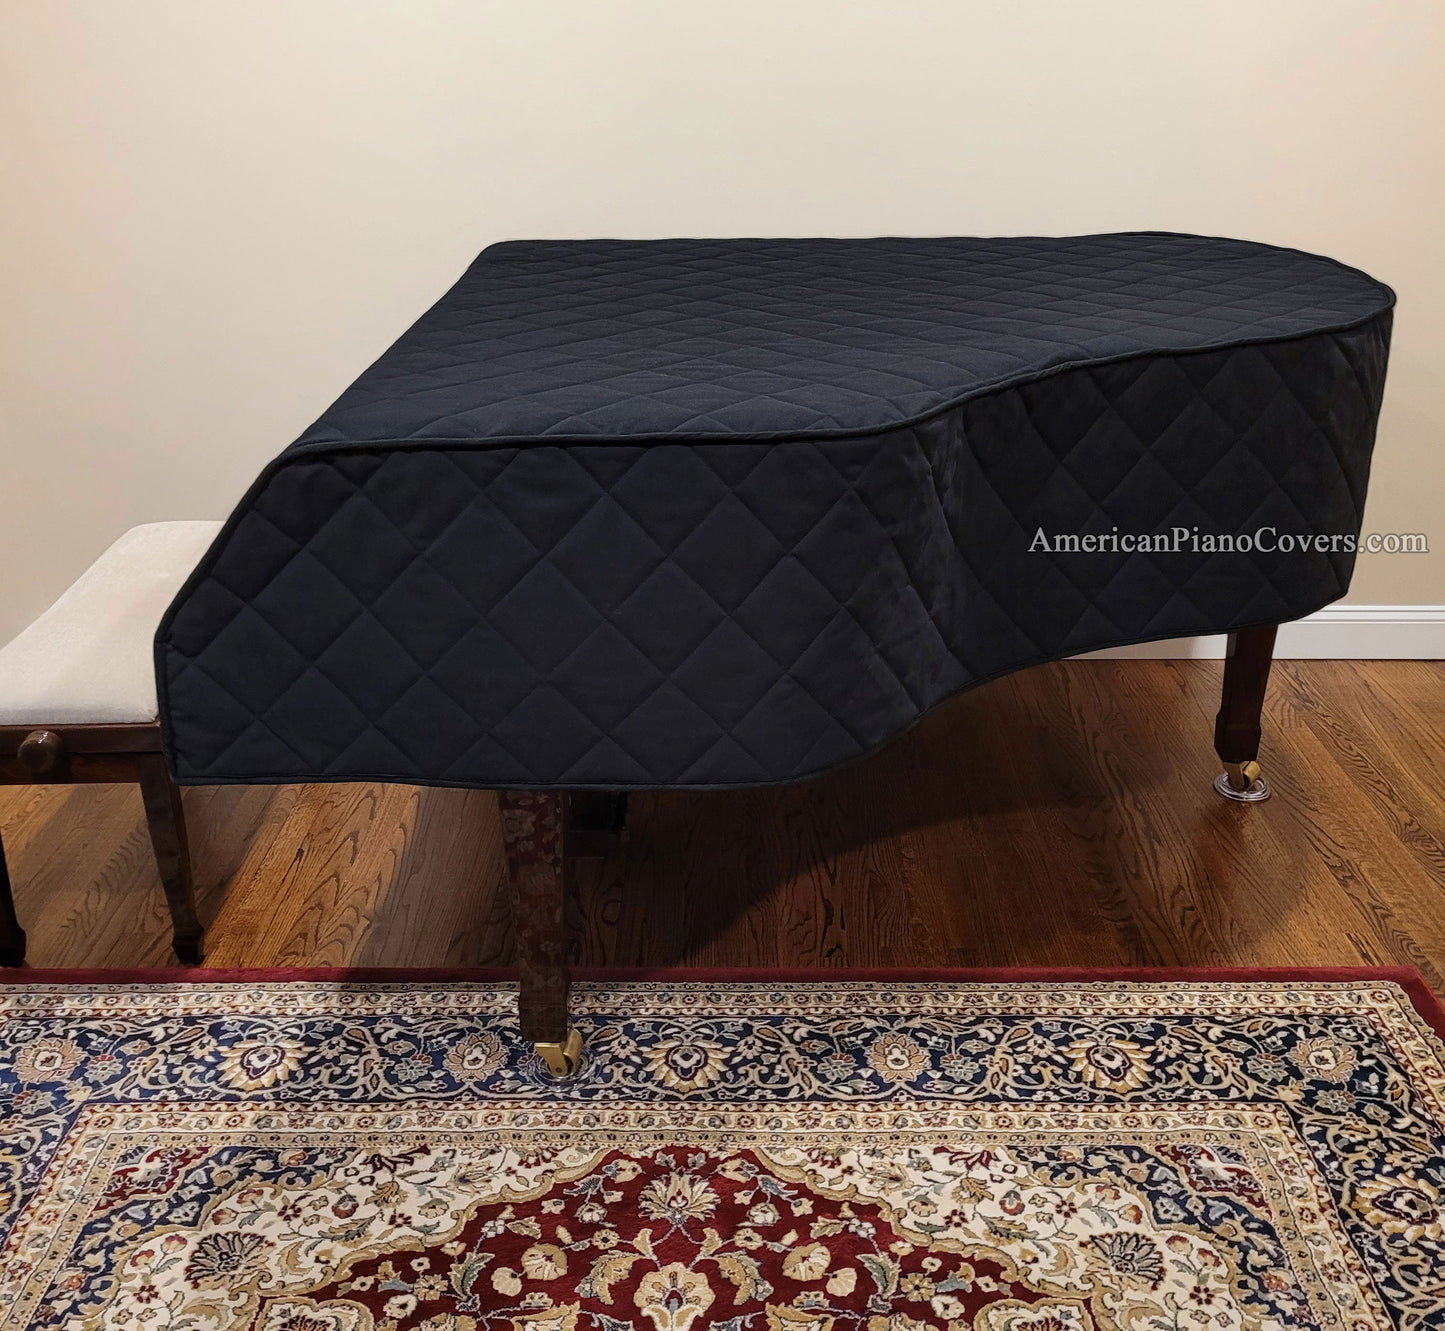 Weber Piano Covers